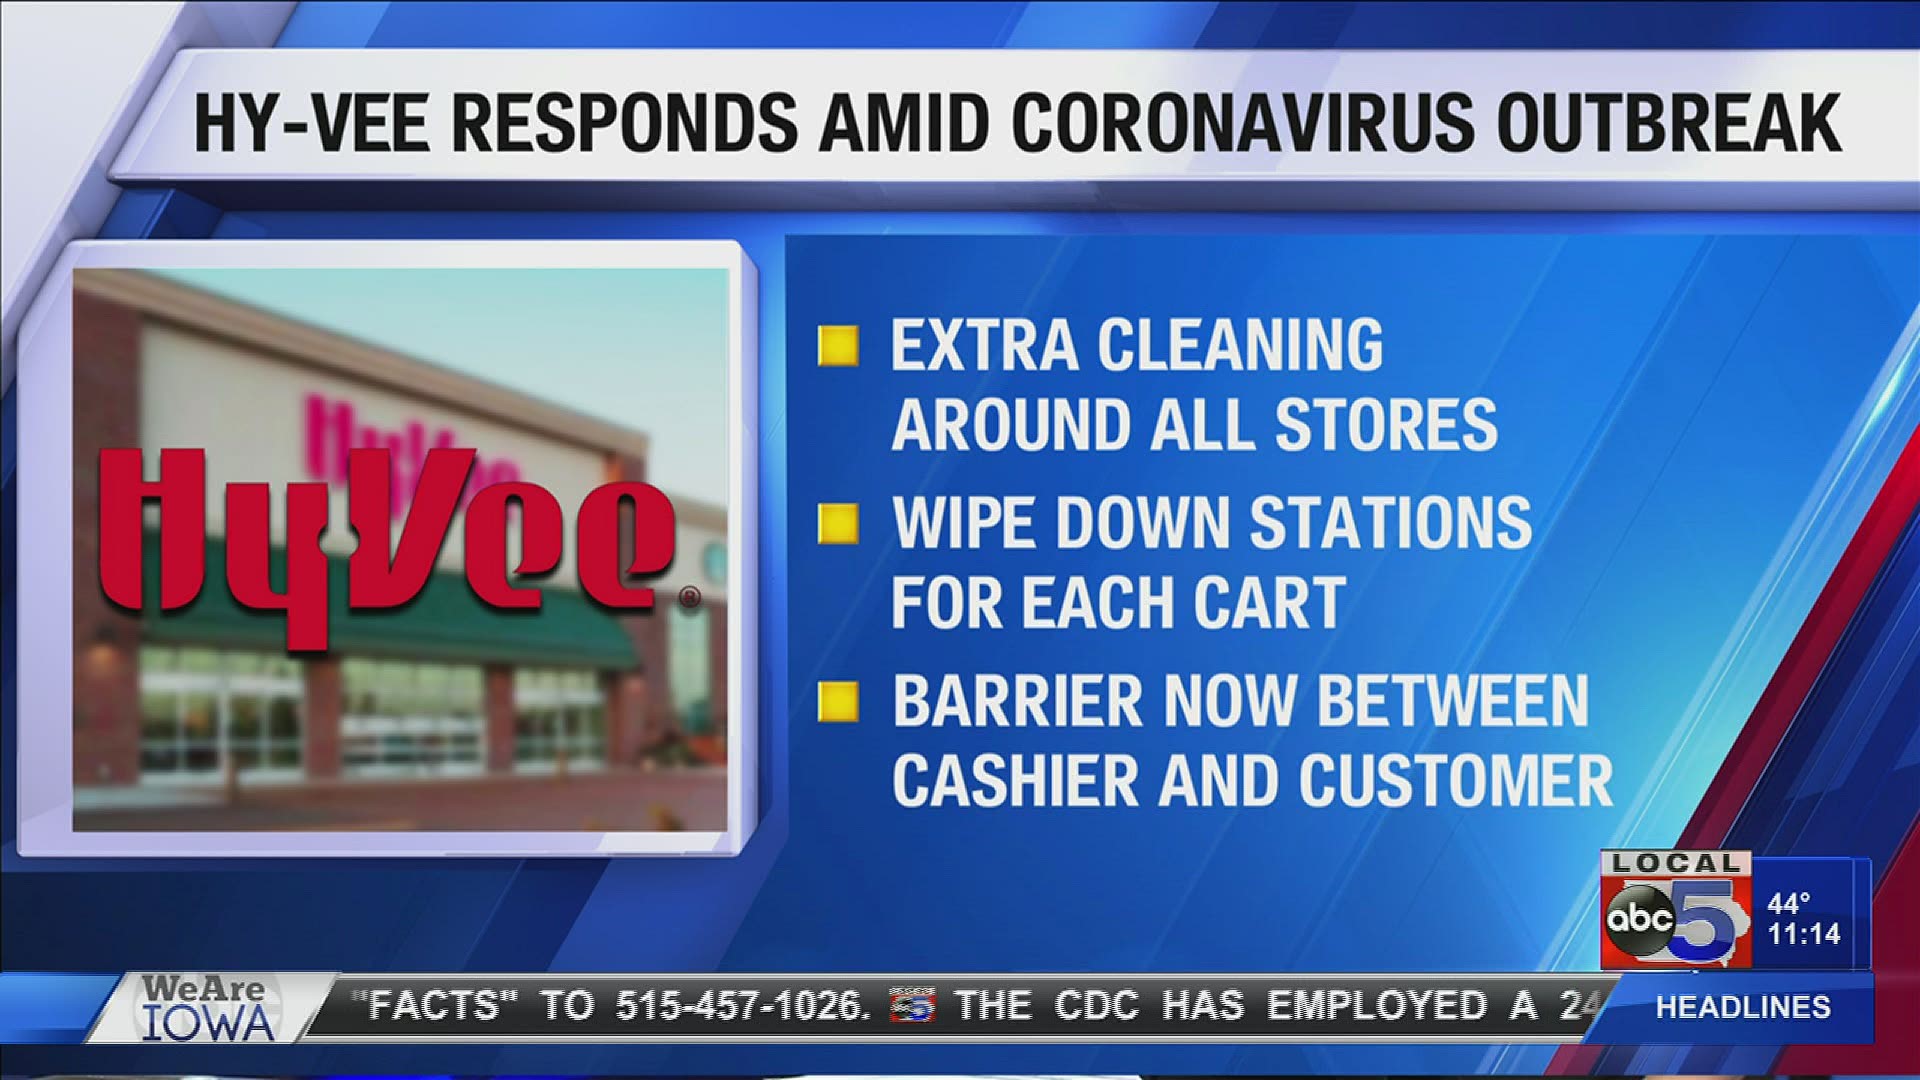 Hy-Vee continues to make changes around each store to ensure that their staff and customers are safe.